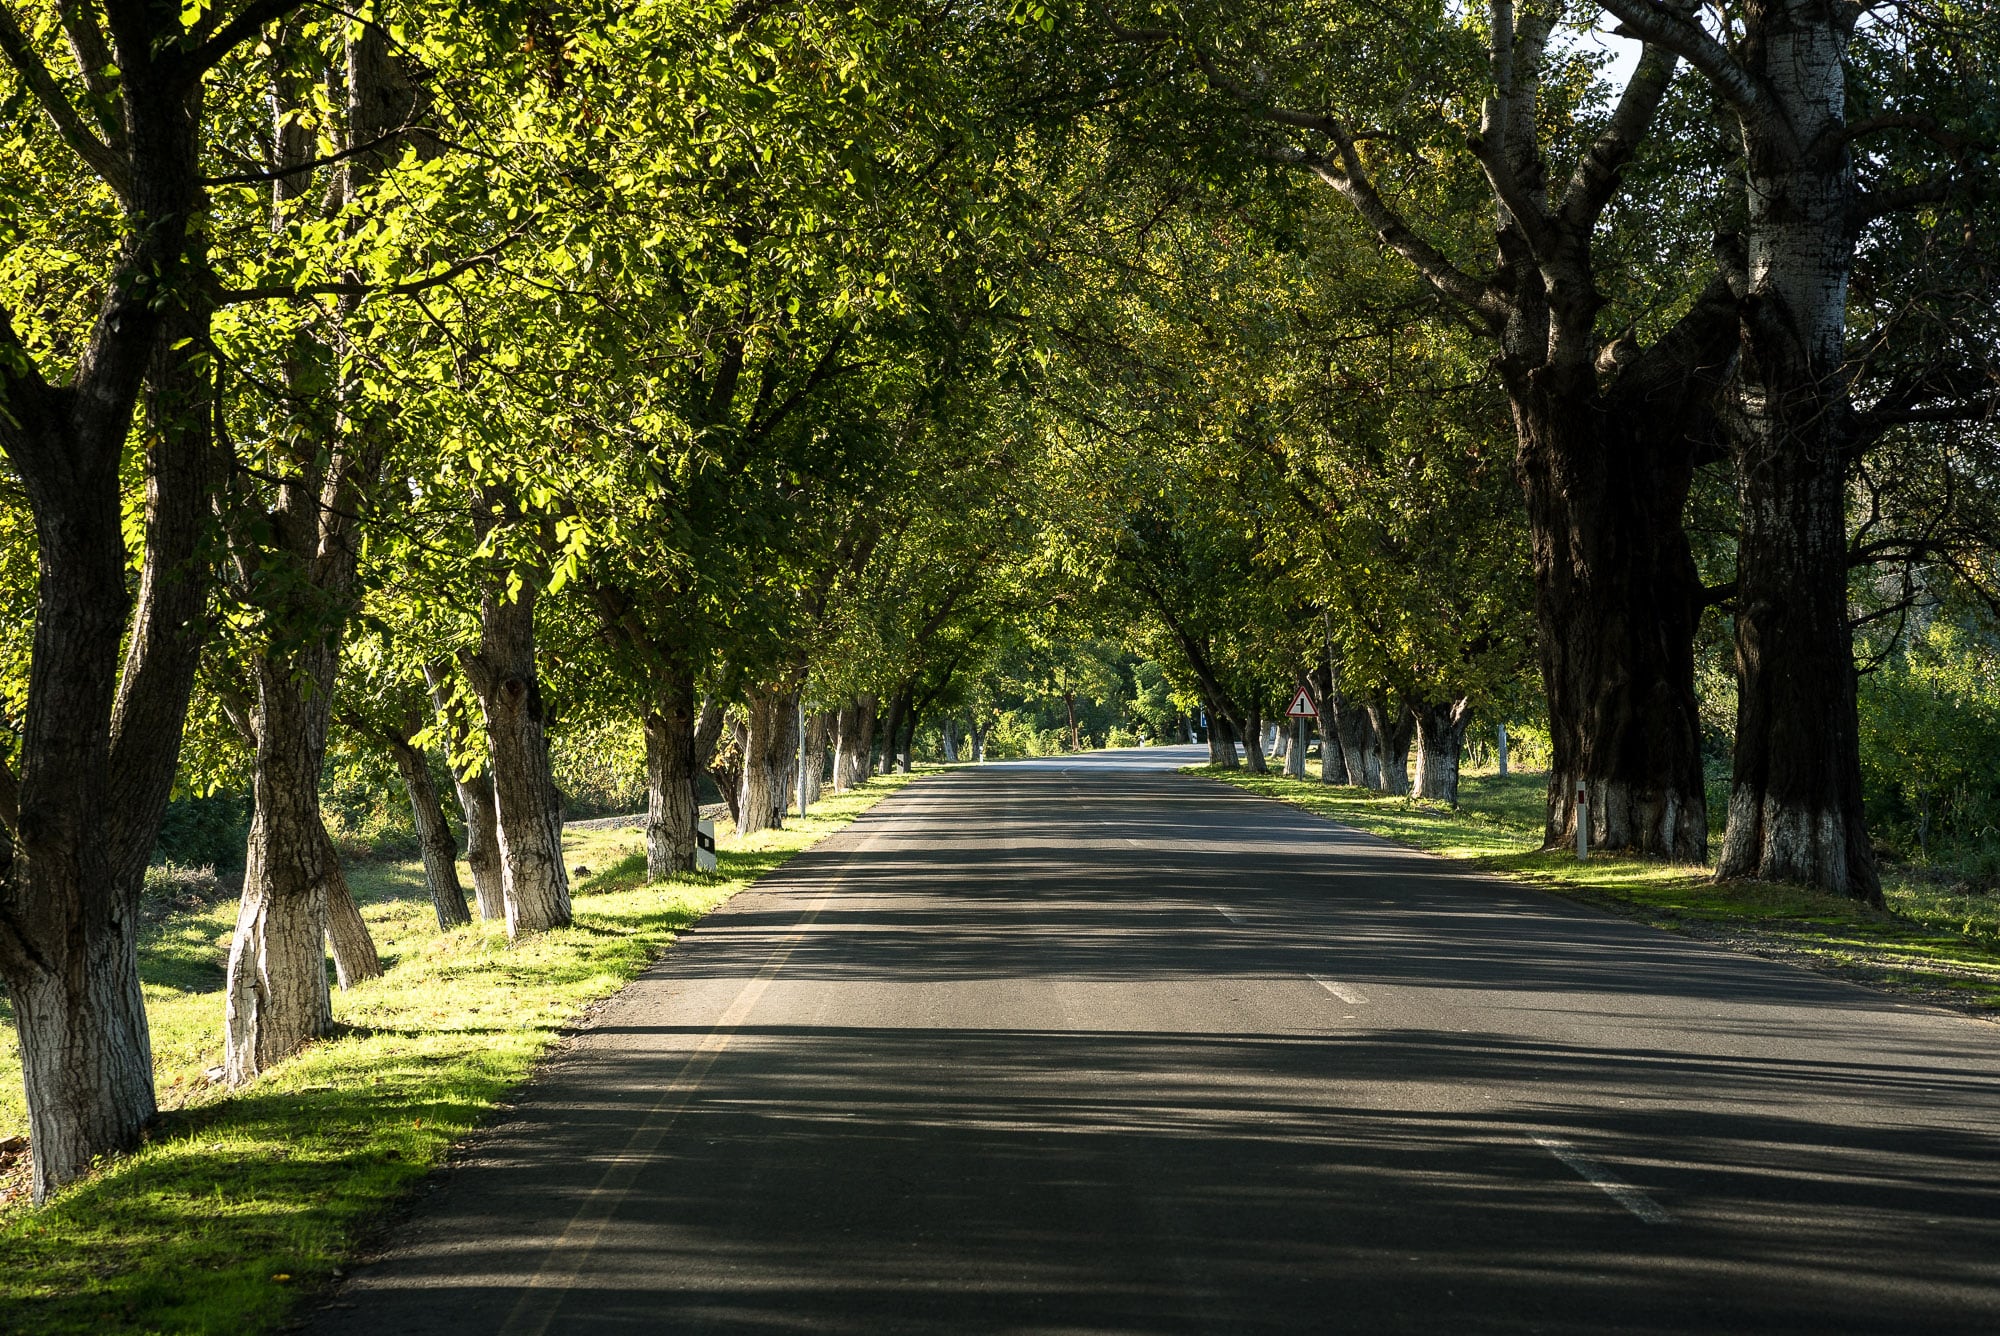 road with trees